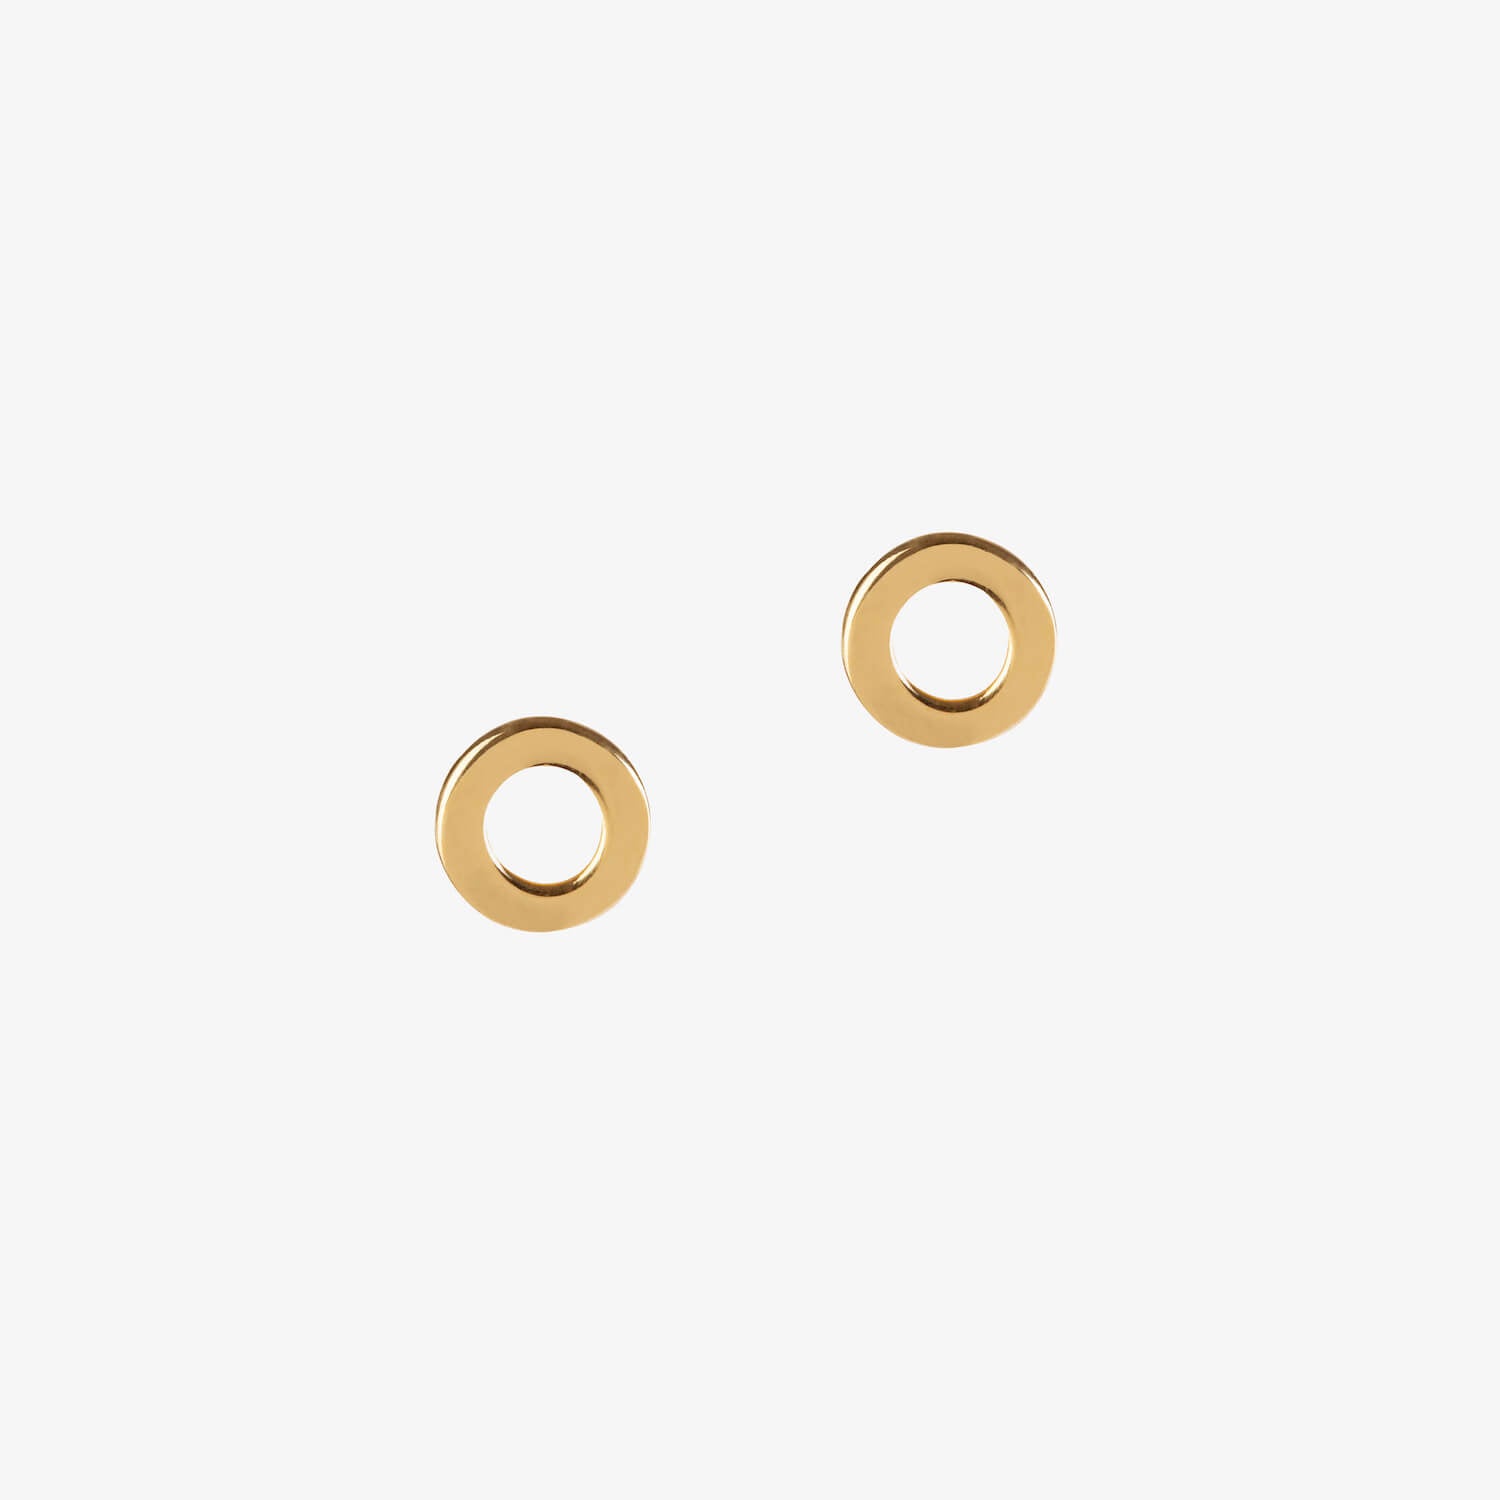 gold loop circle stud earrings by matthew calvin on a white background